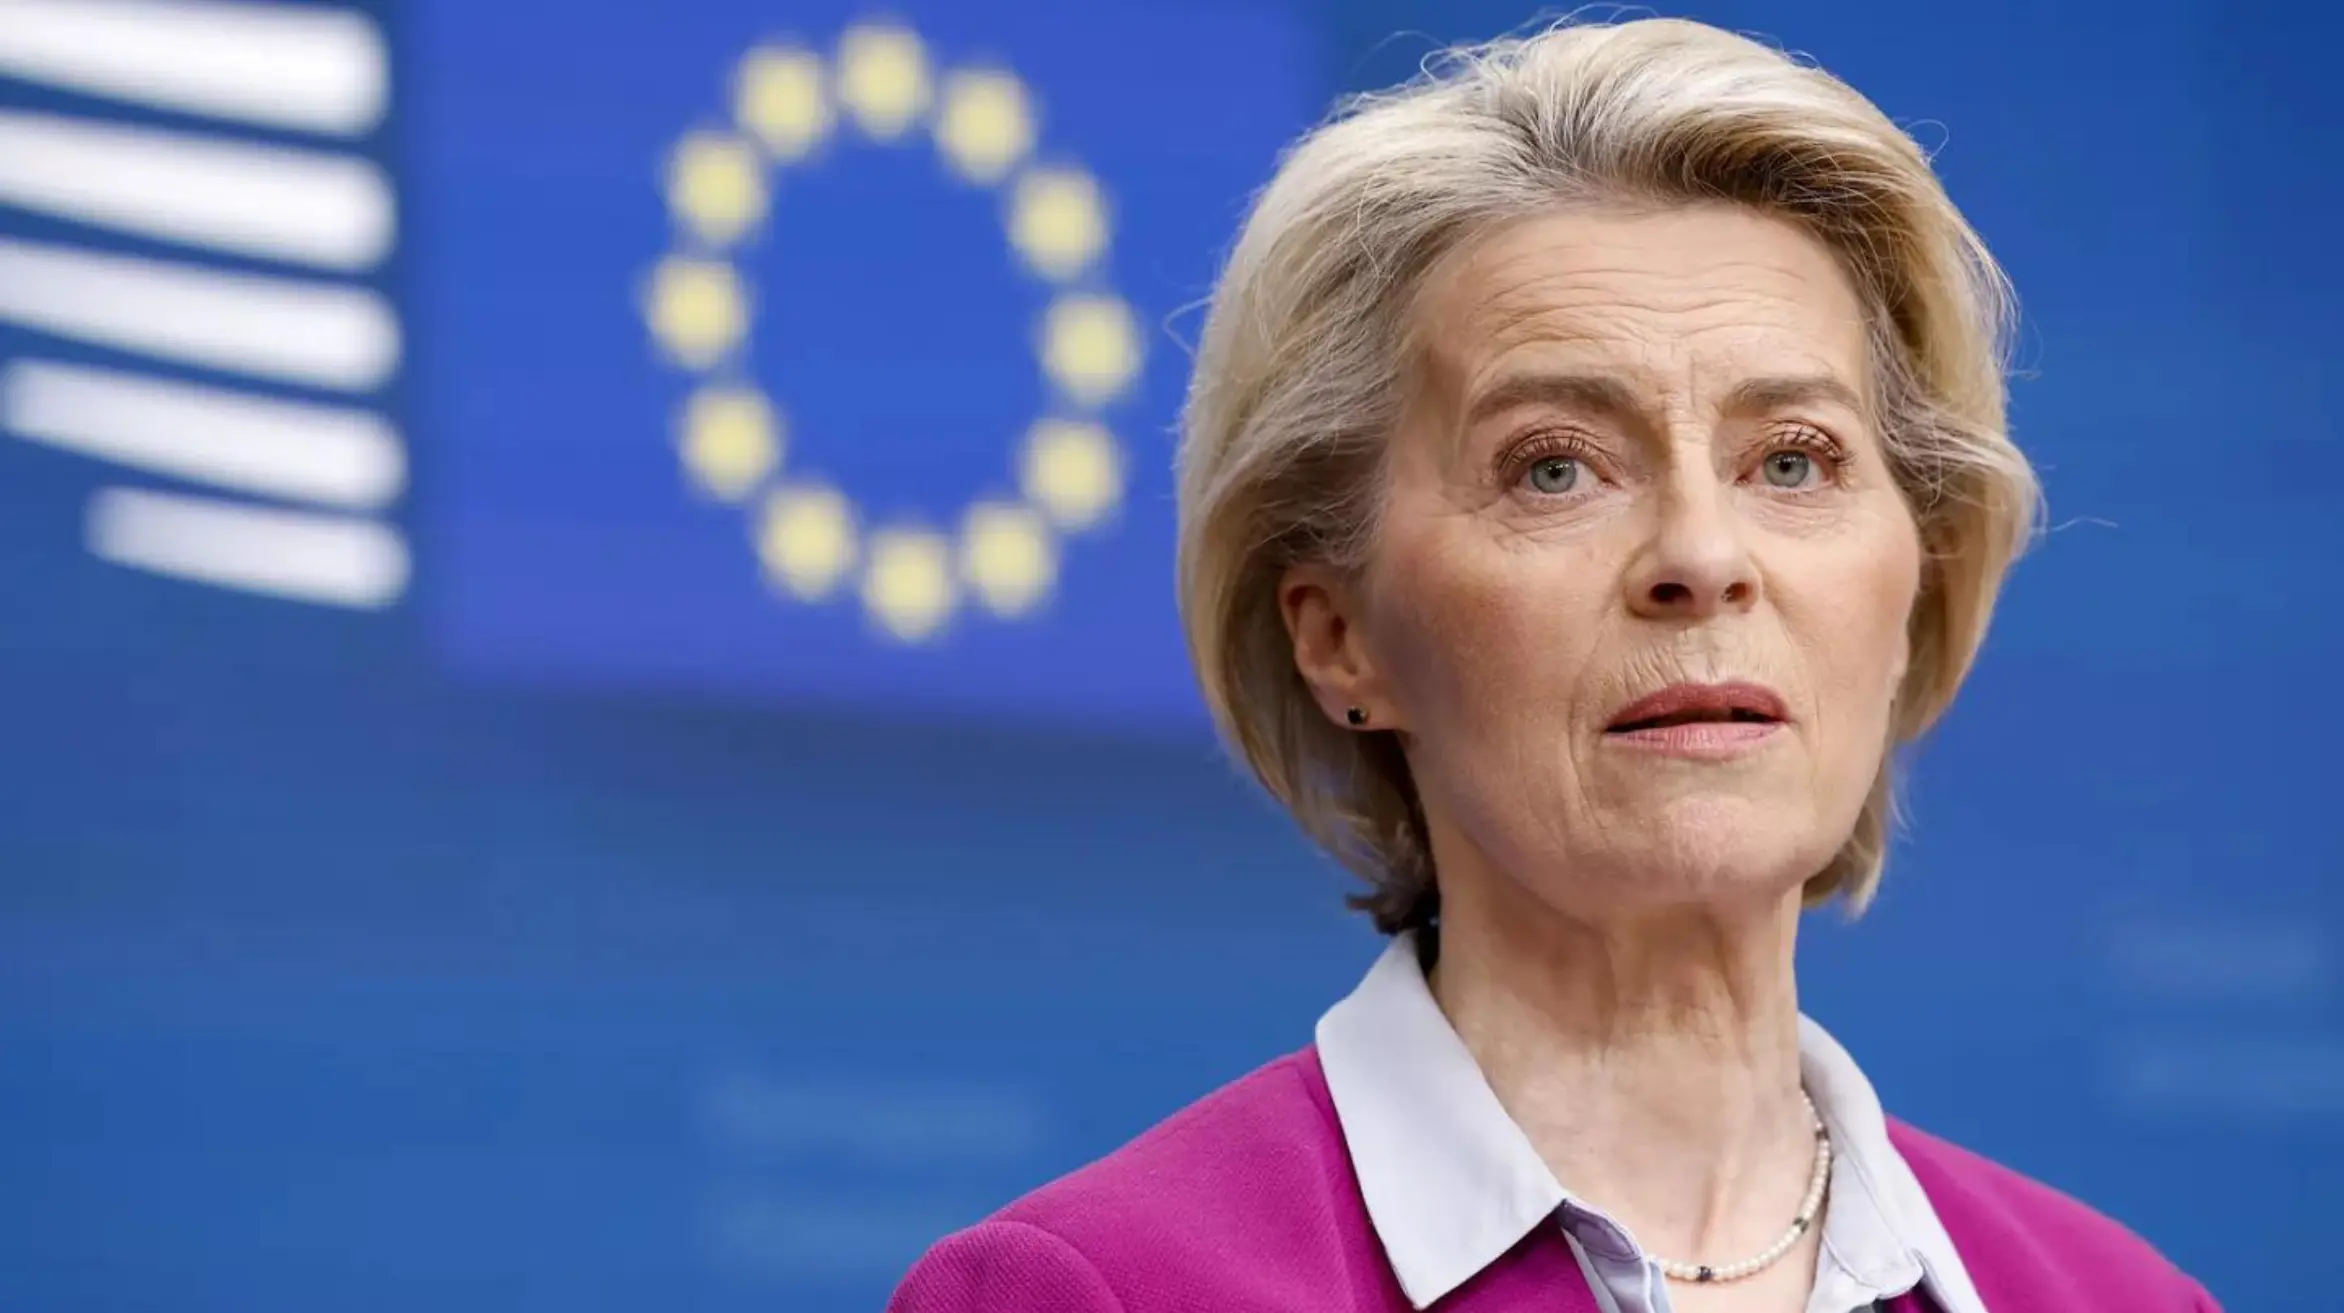 Commission President Von der Leyen Proposes Strategy to Safeguard EU from Foreign Interference in Re-election Bid